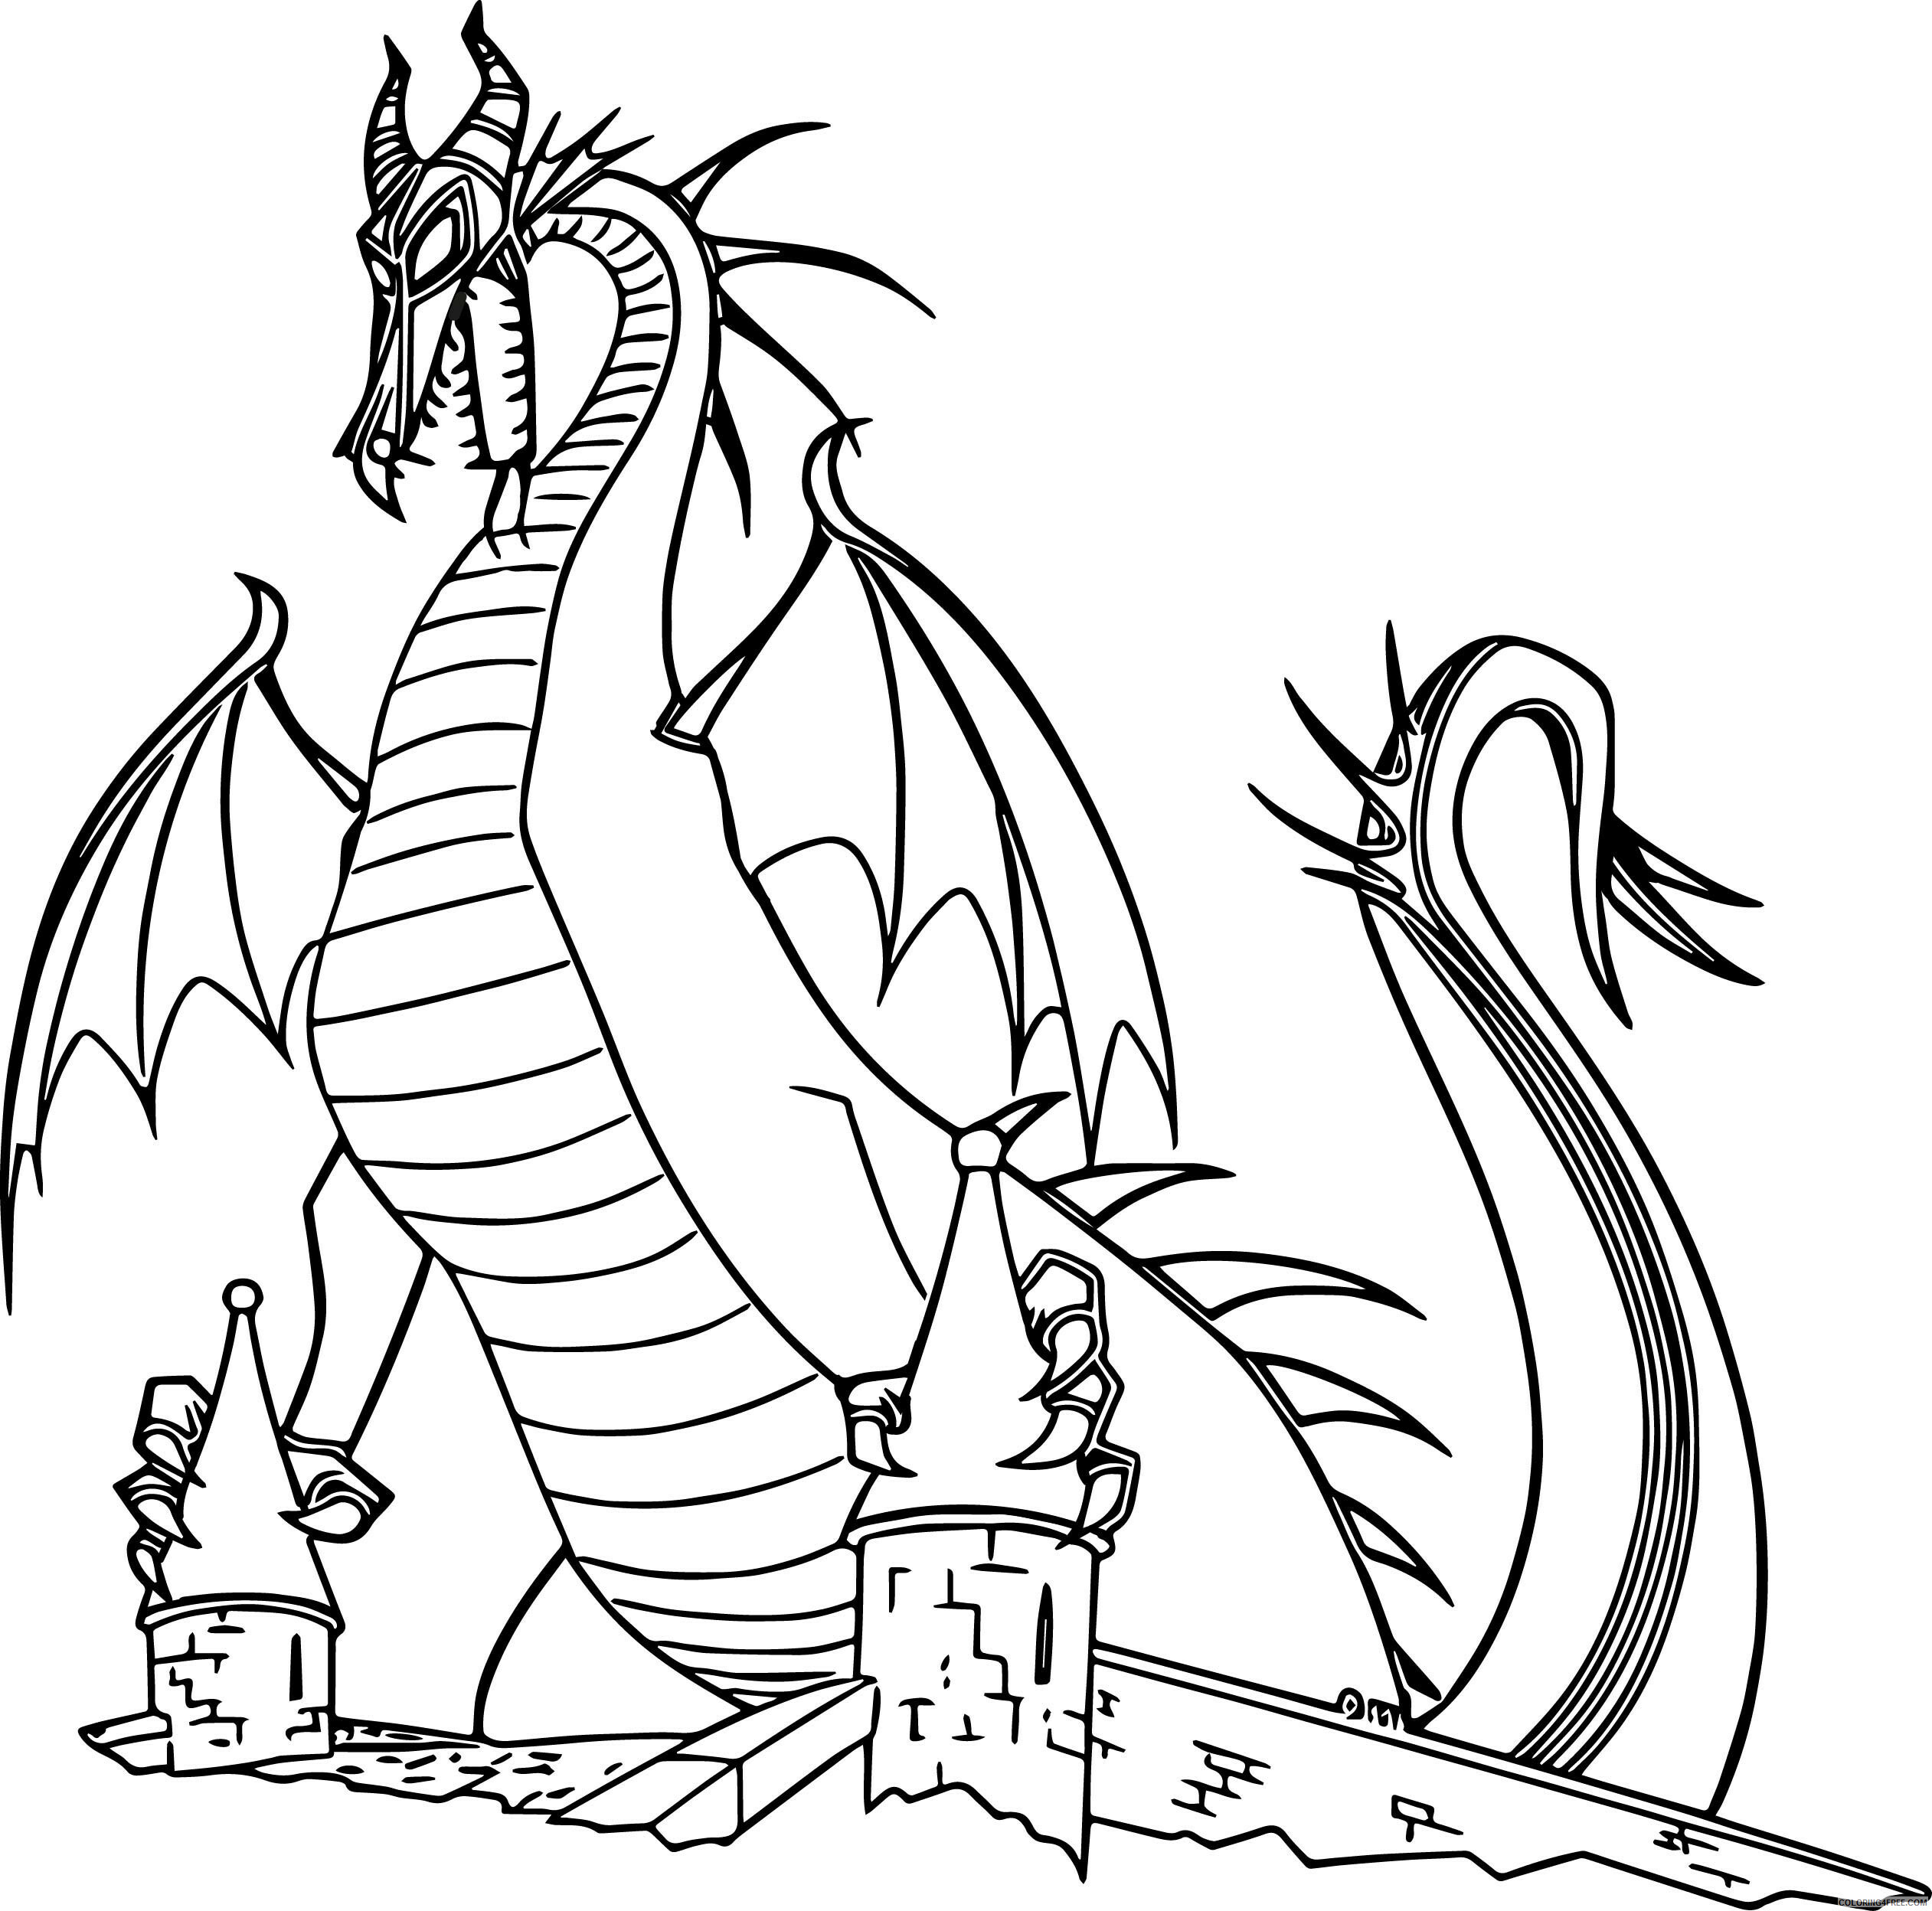 Maleficent Coloring Pages TV Film castle and dragon maleficent print 2020 04815 Coloring4free